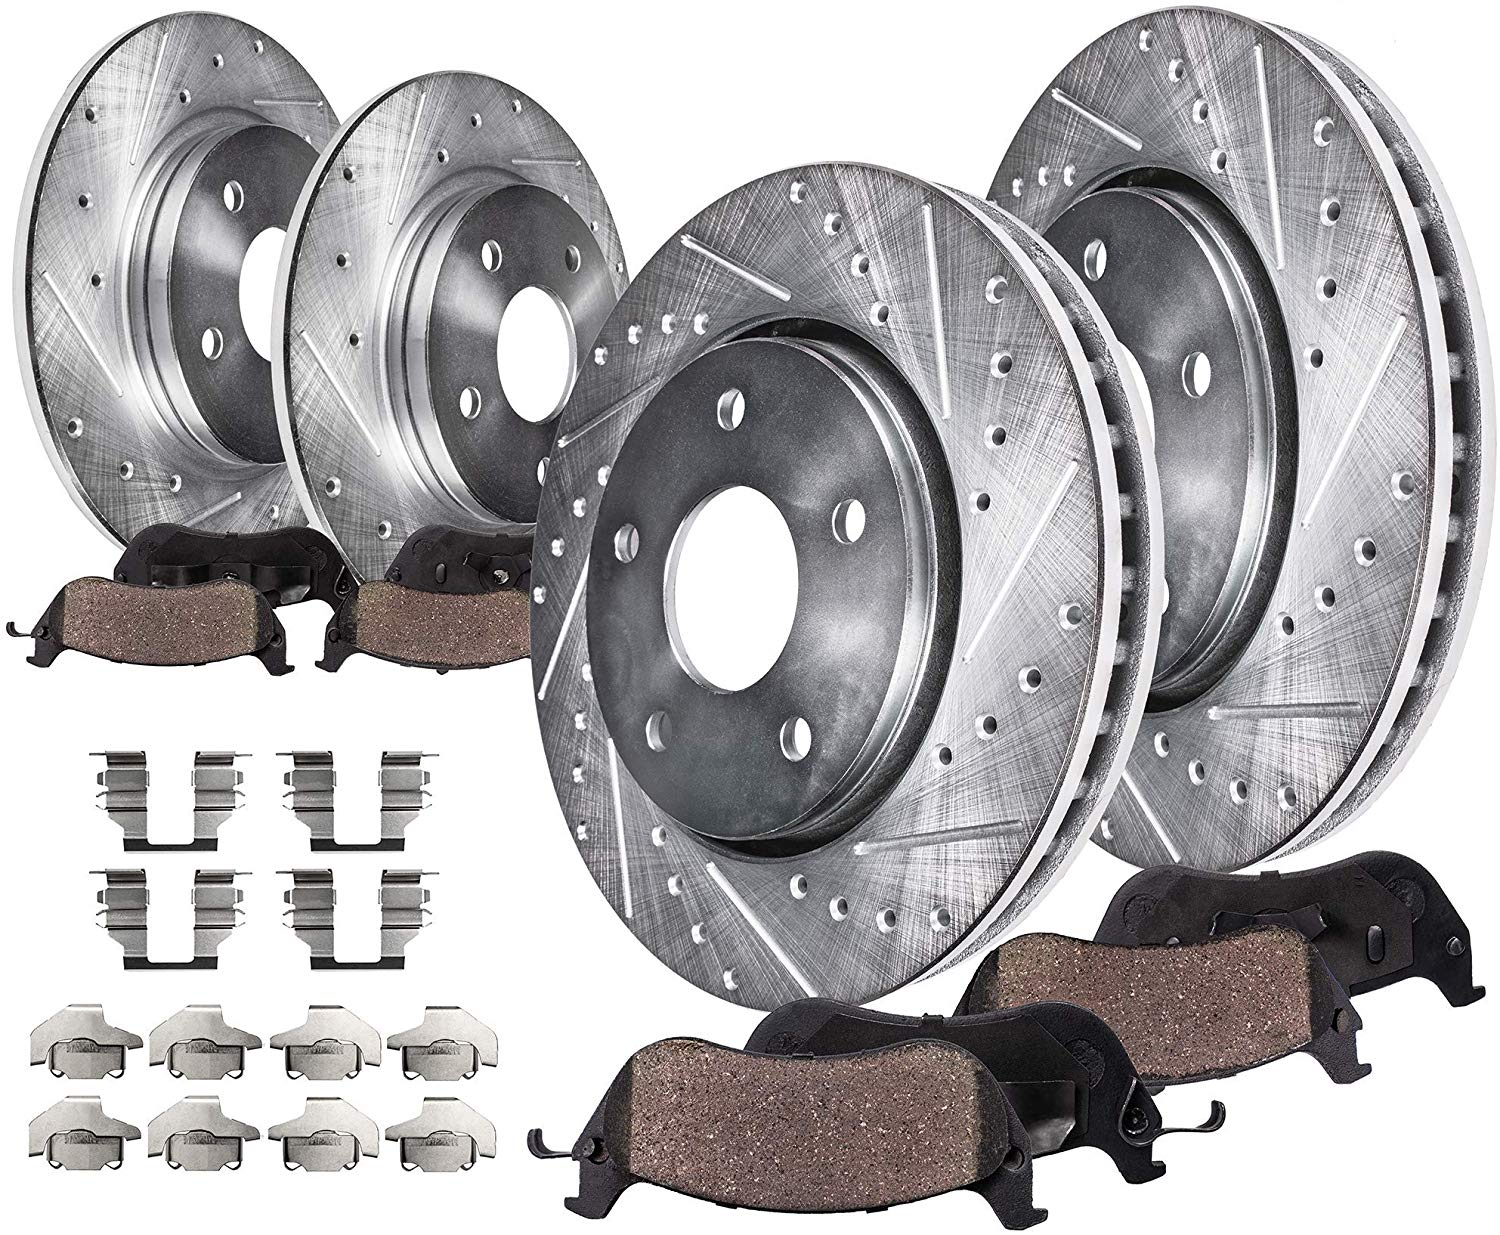 Detroit Axle - All (4) Front and Rear Drilled and Slotted Disc Brake Rotors w/Ceramic Pads w/Hardware for 2014 2015 2016 Kia Soul